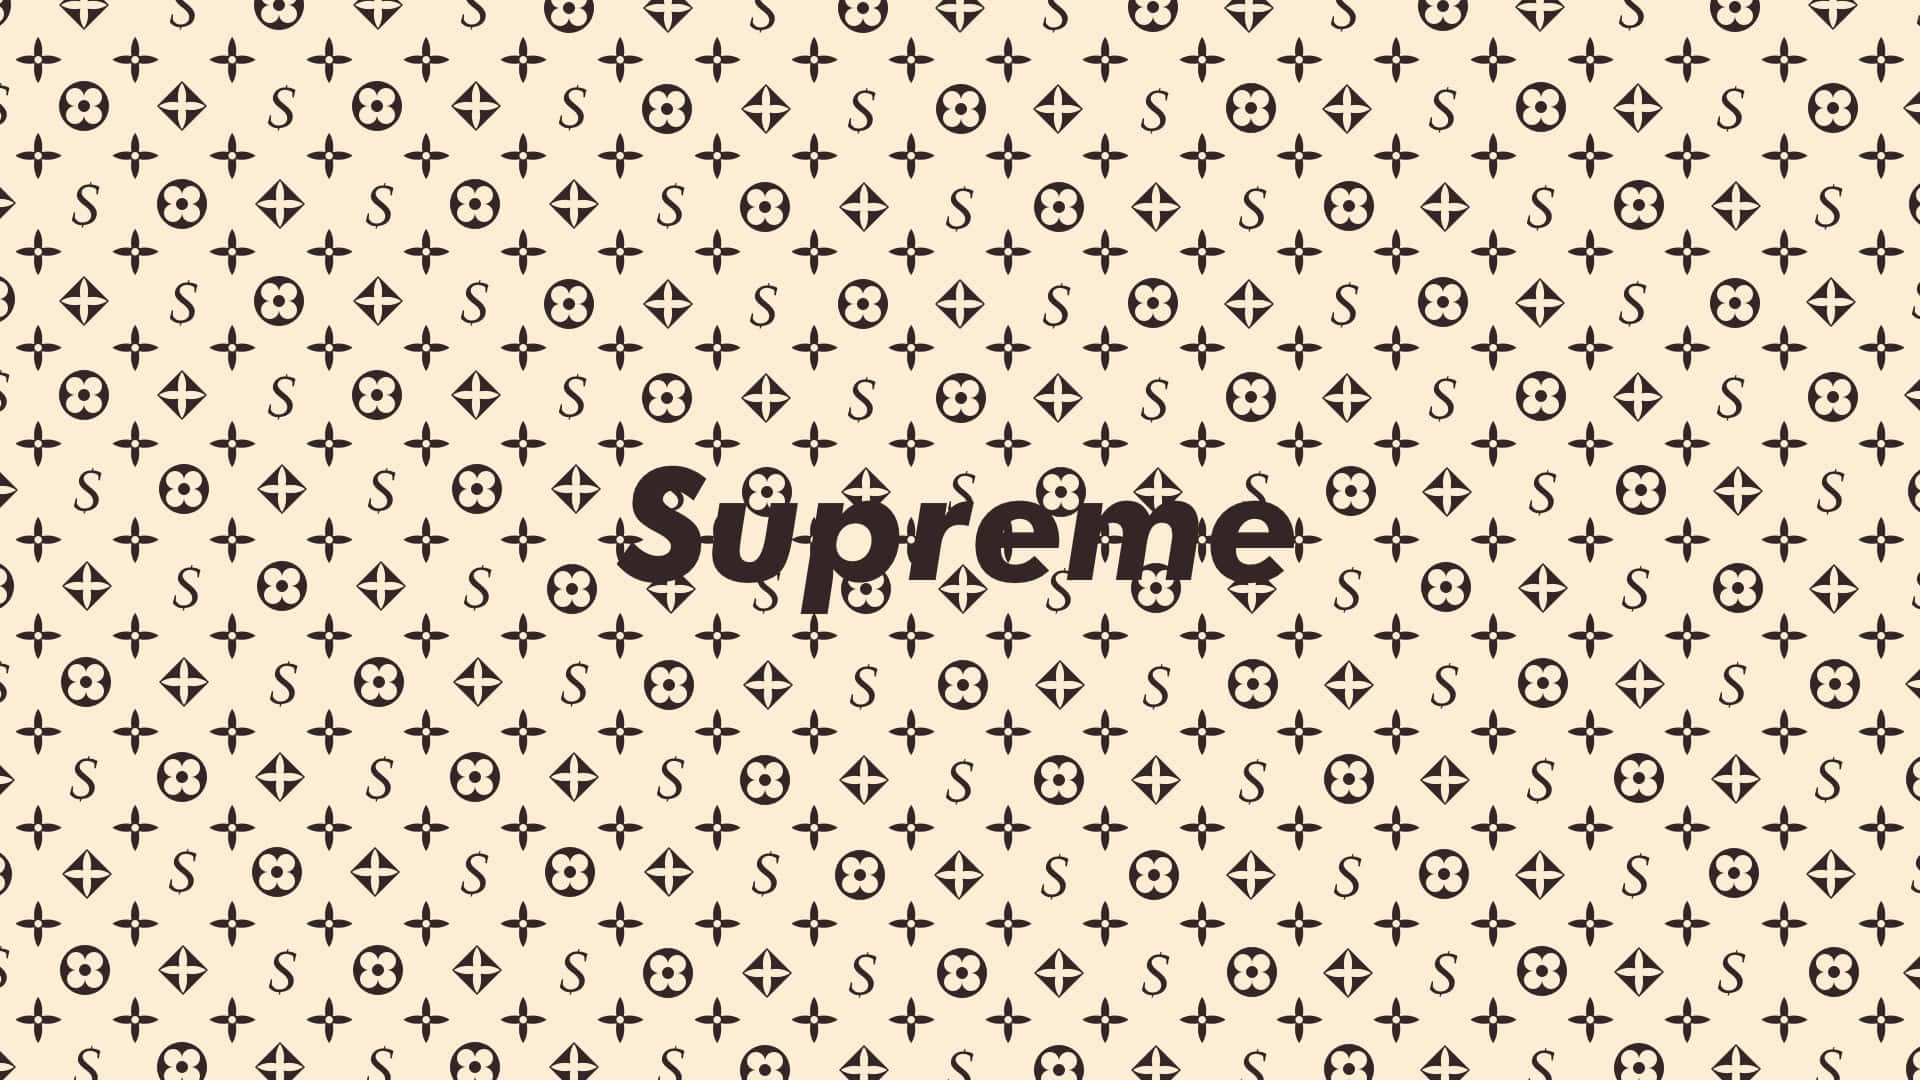 "The Supreme logo is instantly recognizable around the world." Wallpaper